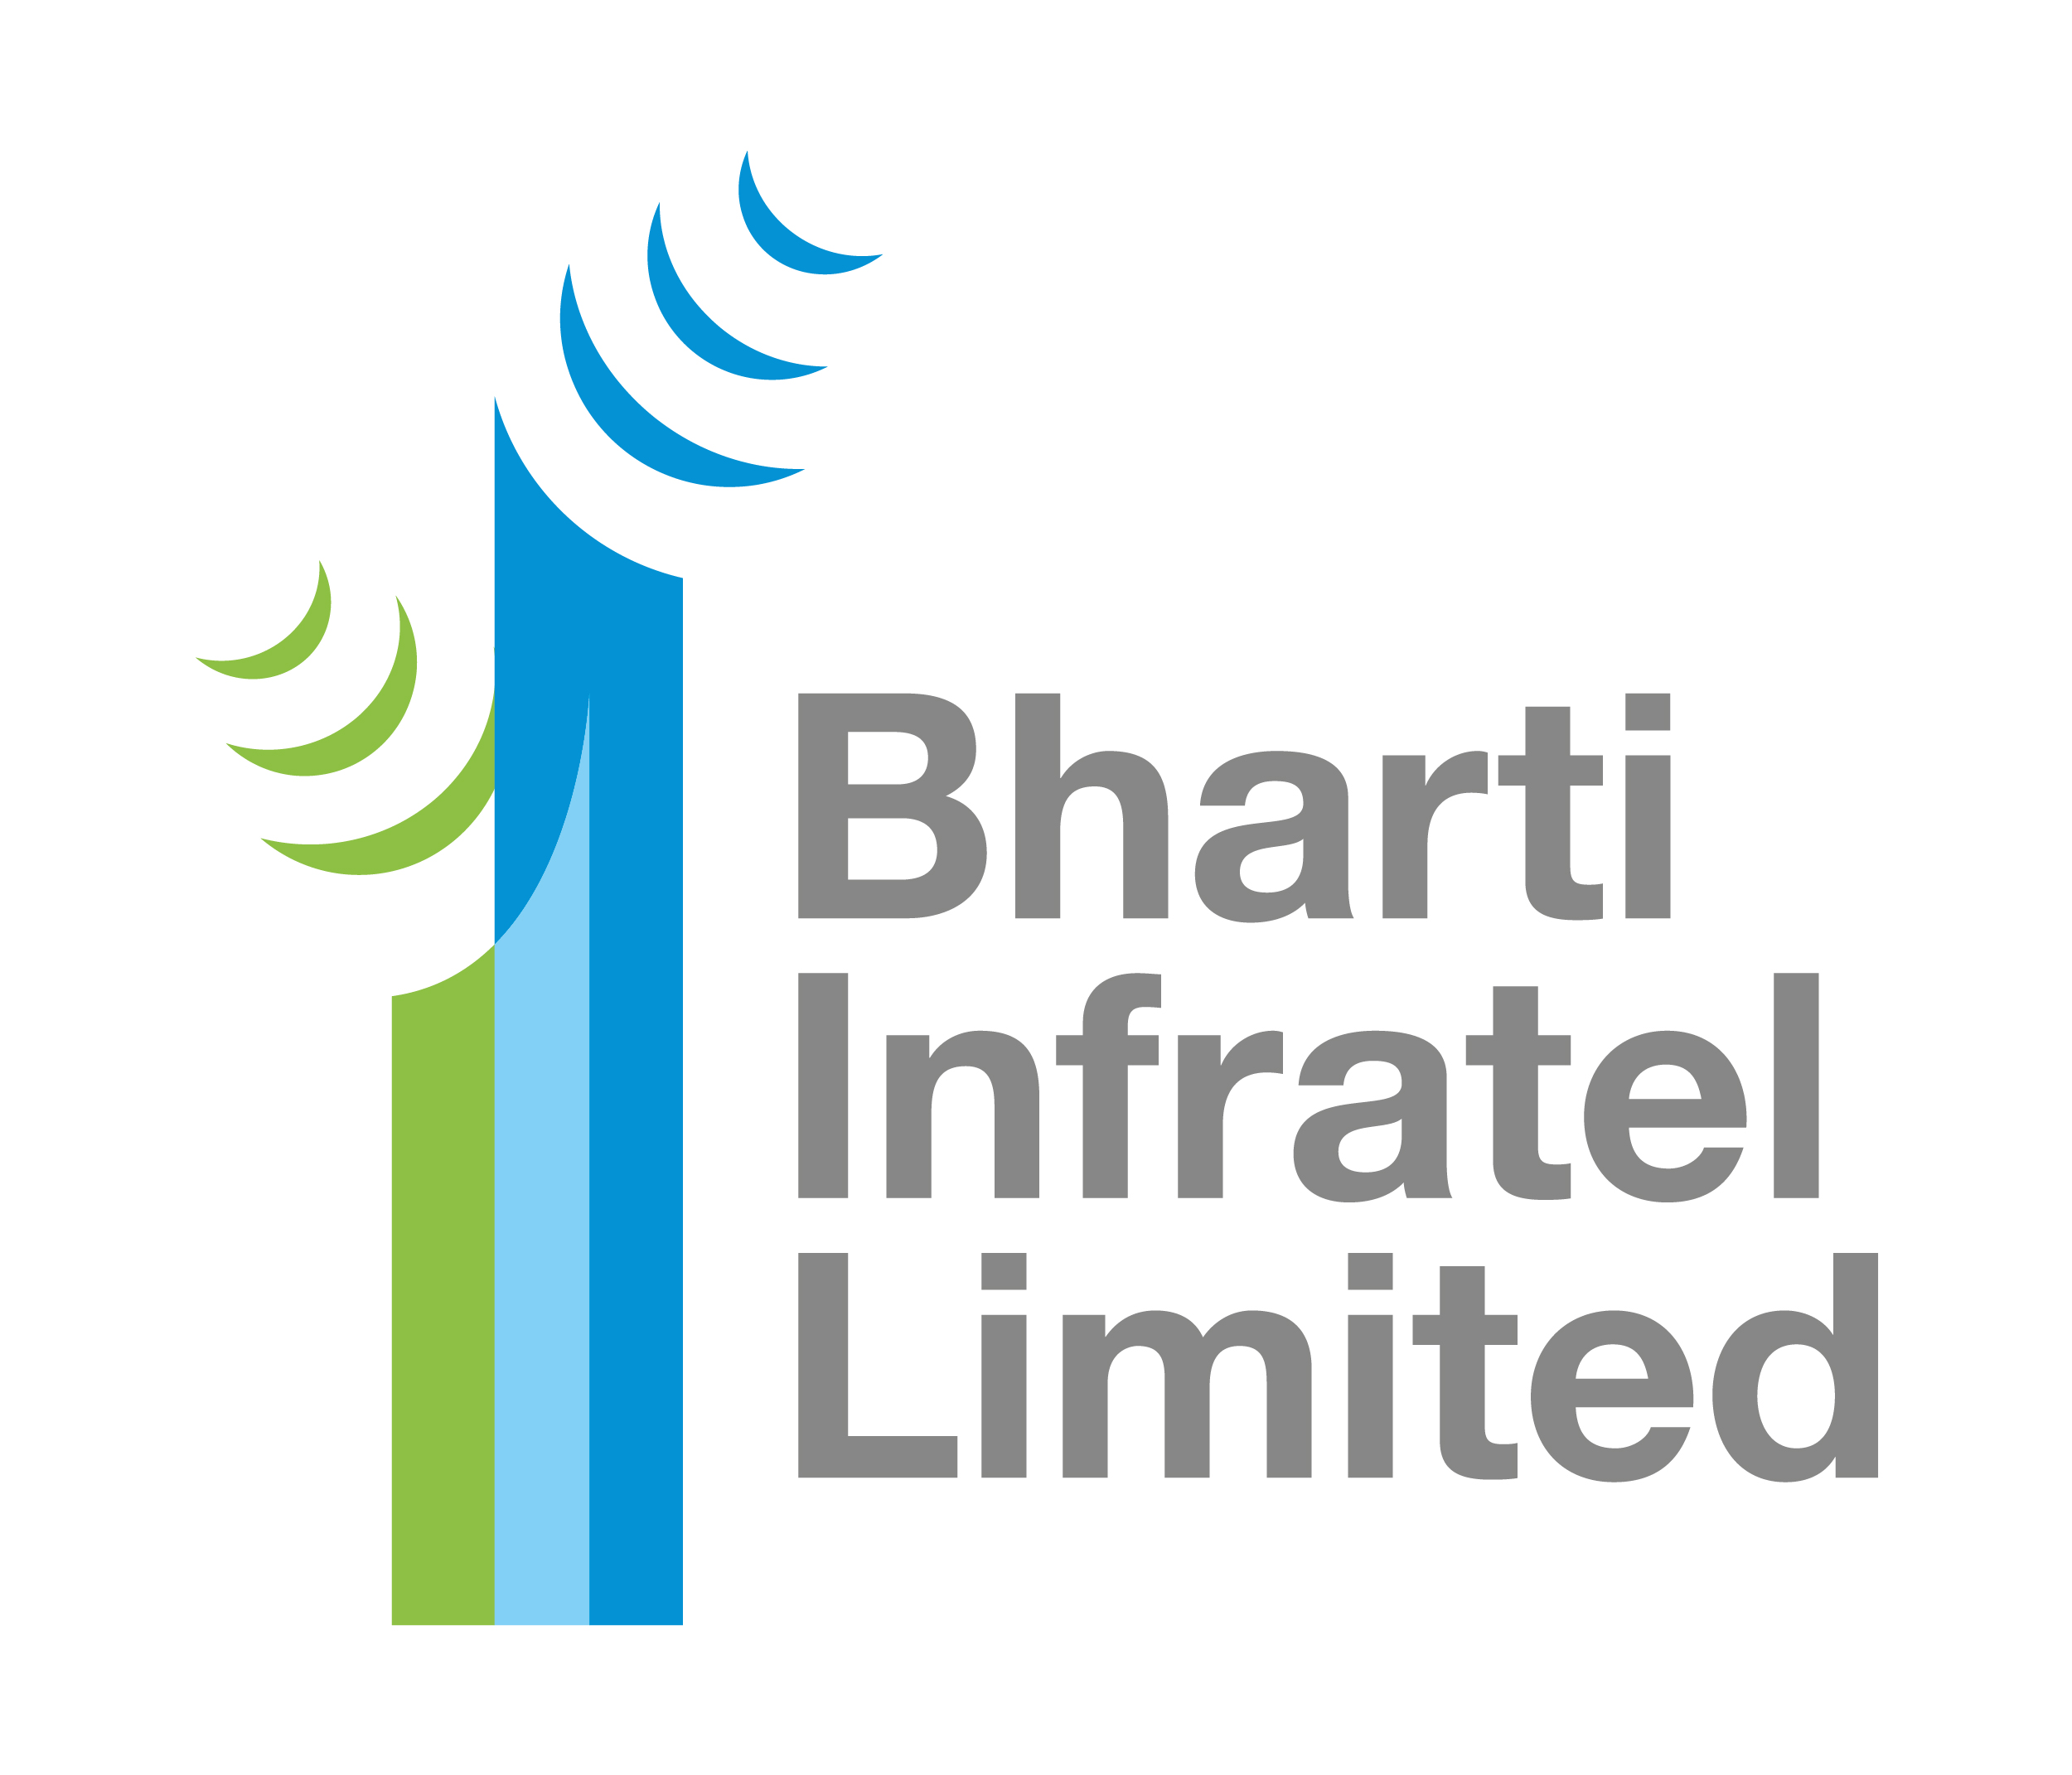 Bharti Infratel, Indus Towers merger gets NCLT nod